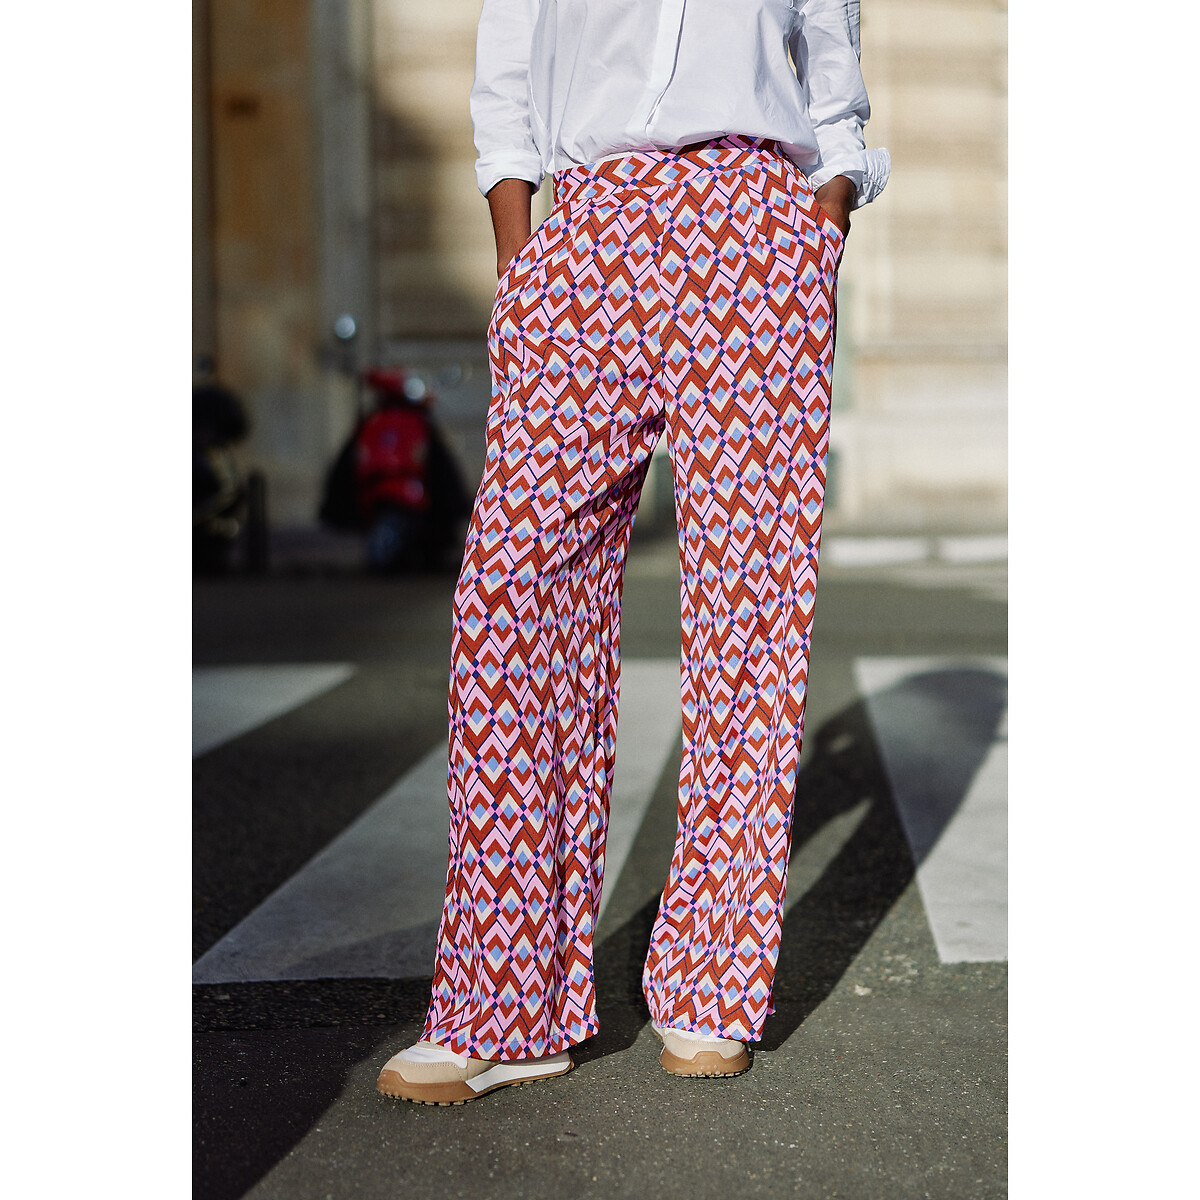 Polette Cotton Mix Trousers in Graphic Print